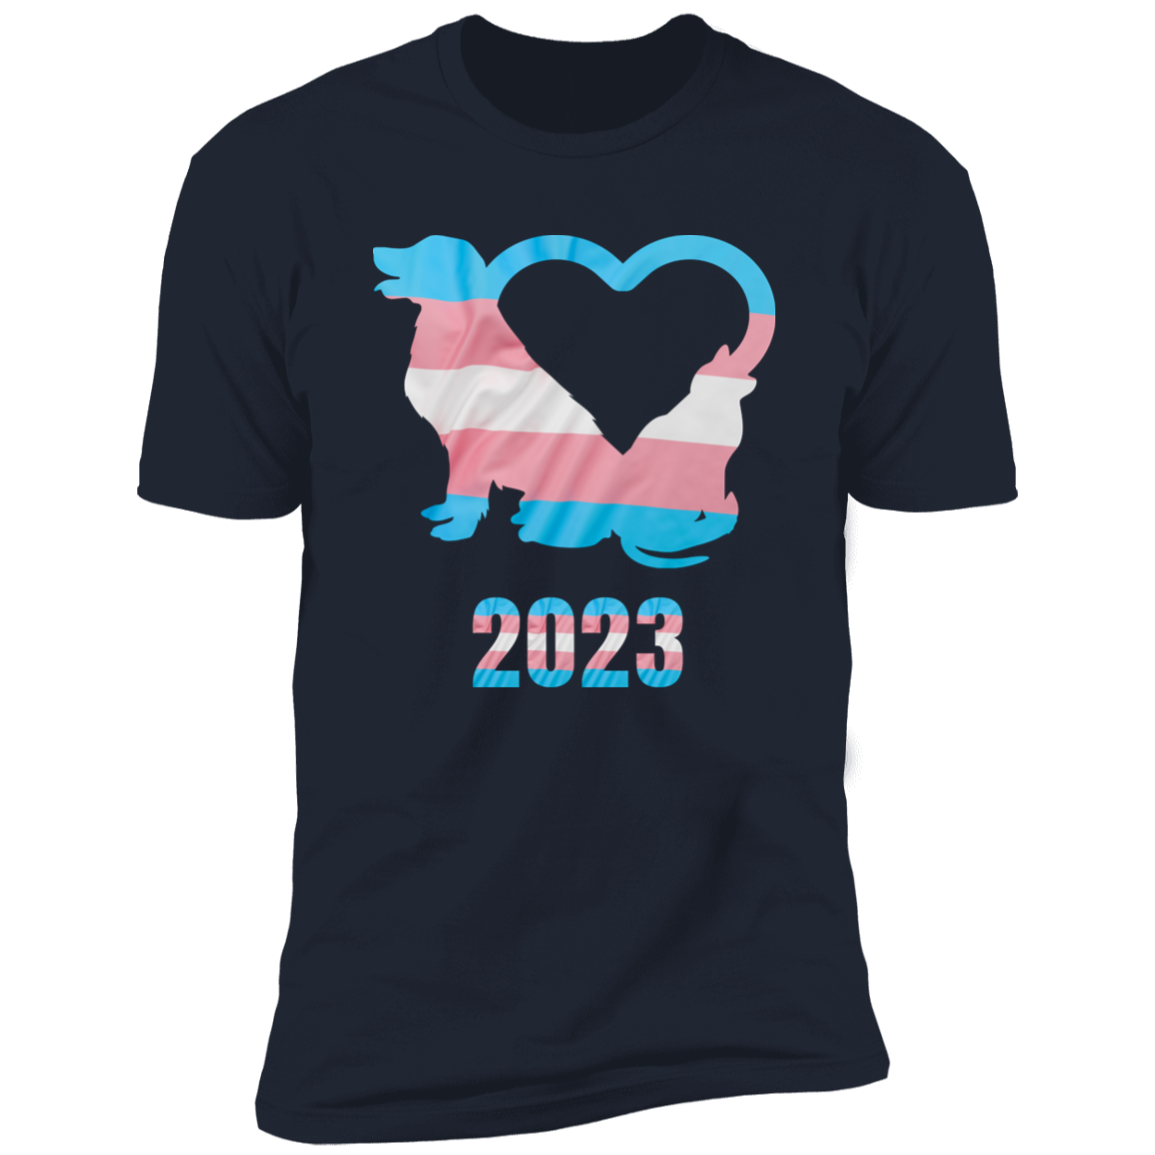 Trans Pride Dog & Cat Heart Pride T-shirt, Trans Pride Dog & Cat Shirt for humans, in navy blue